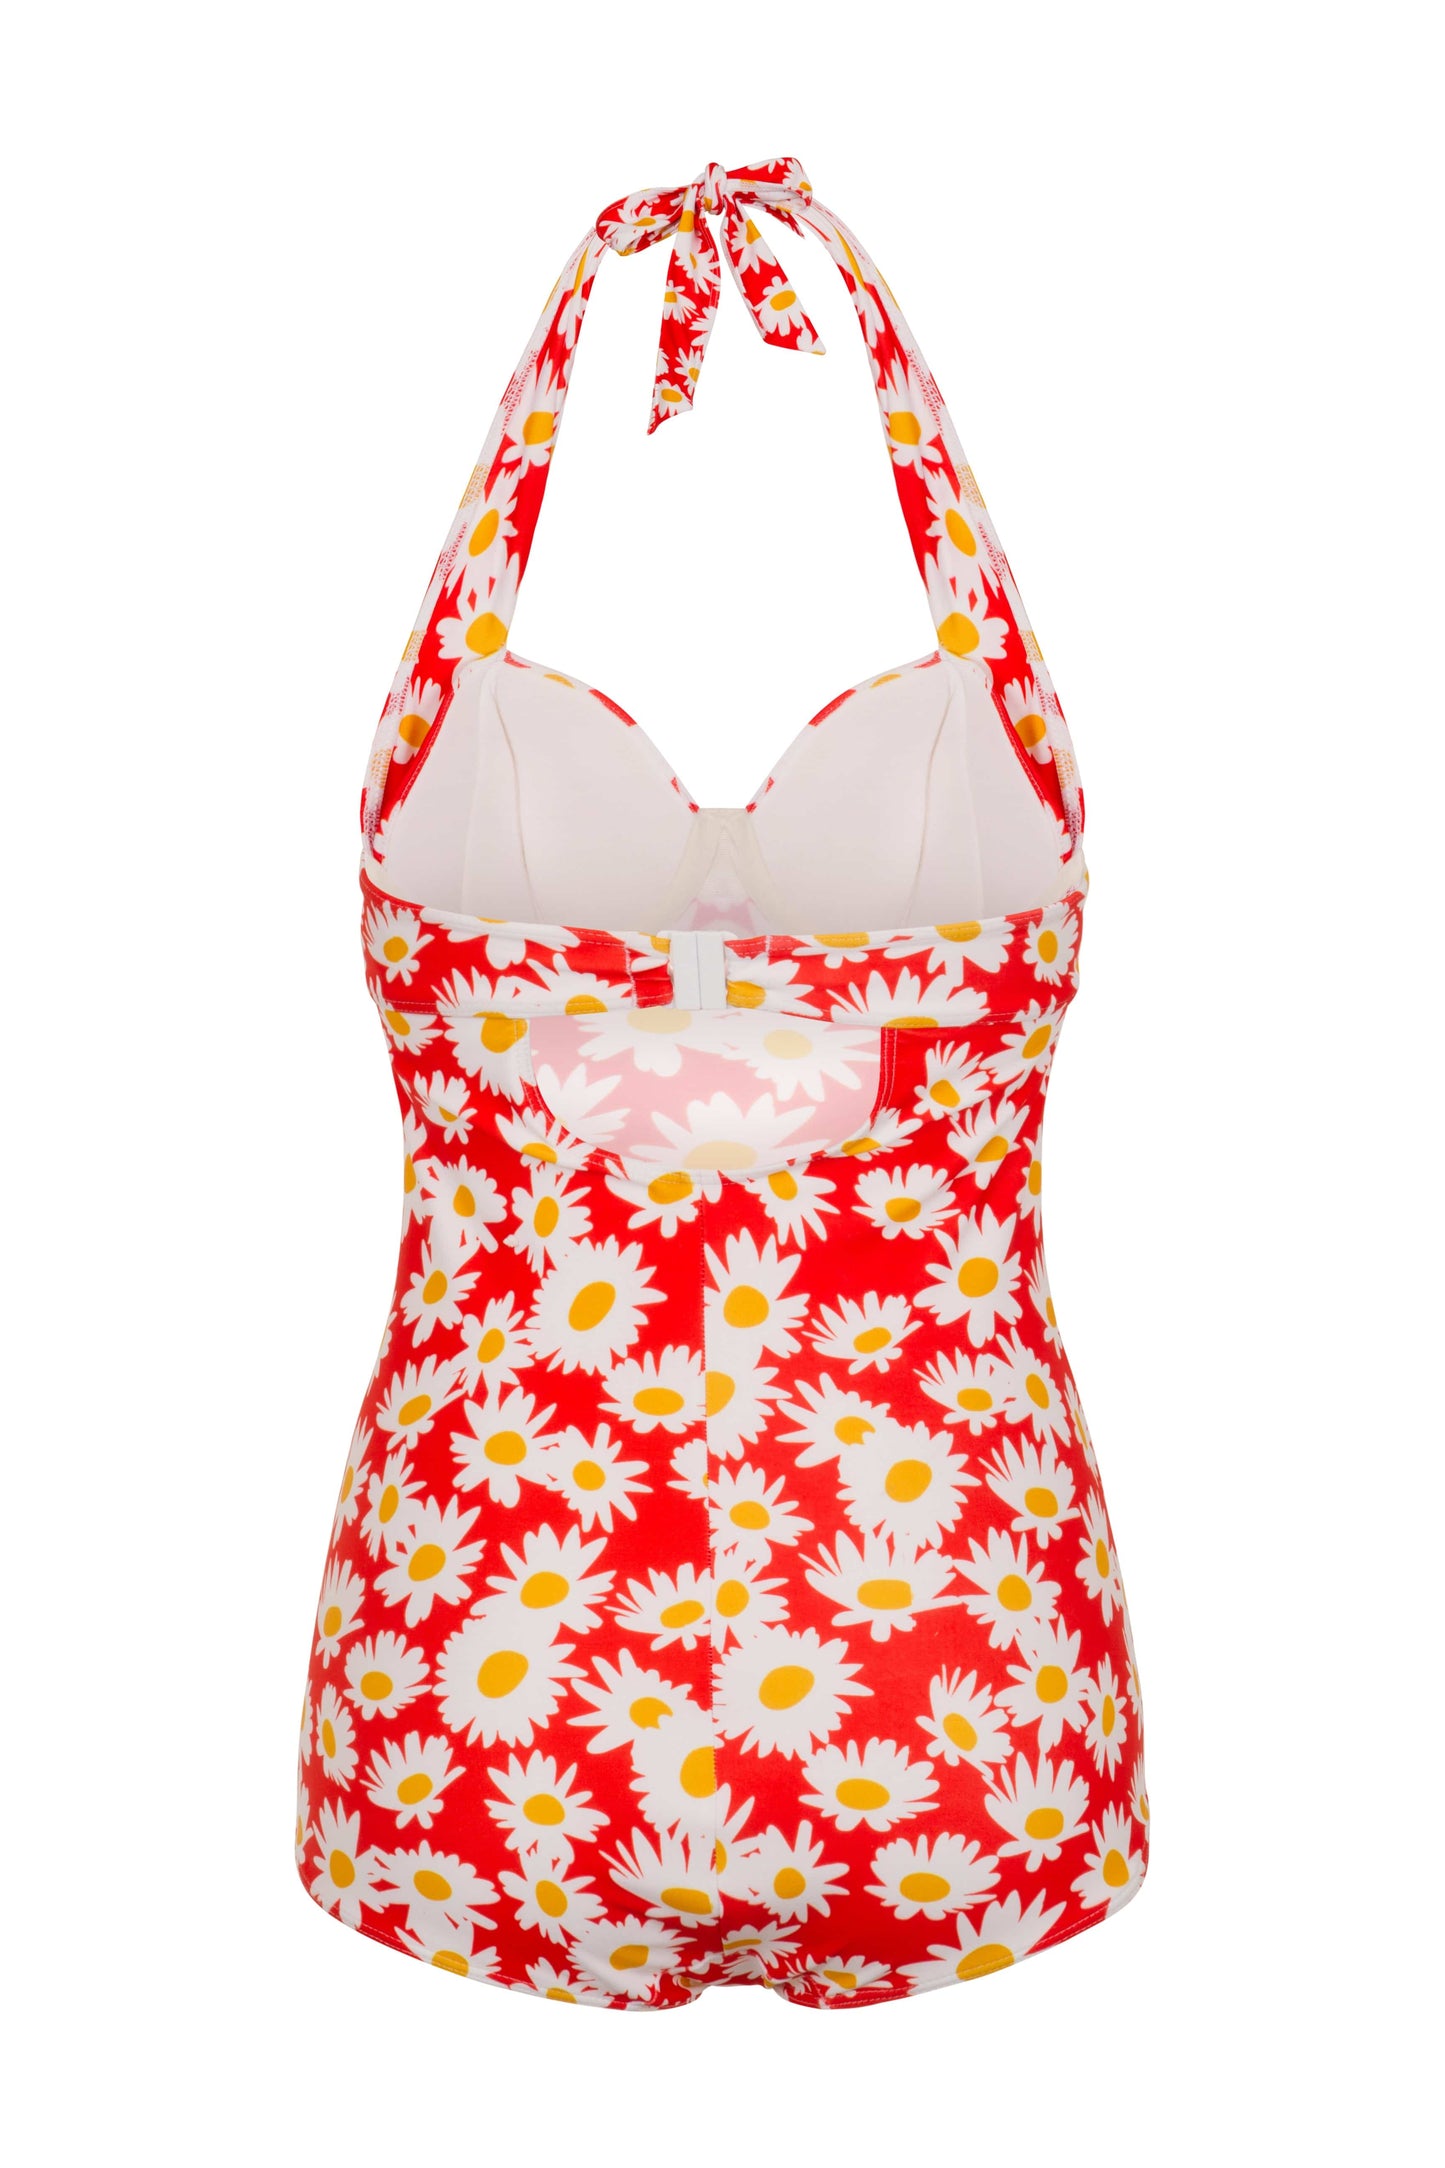 Bettylicious ECO Underwired Vintage Style with Daisy Print in Red Swim ...